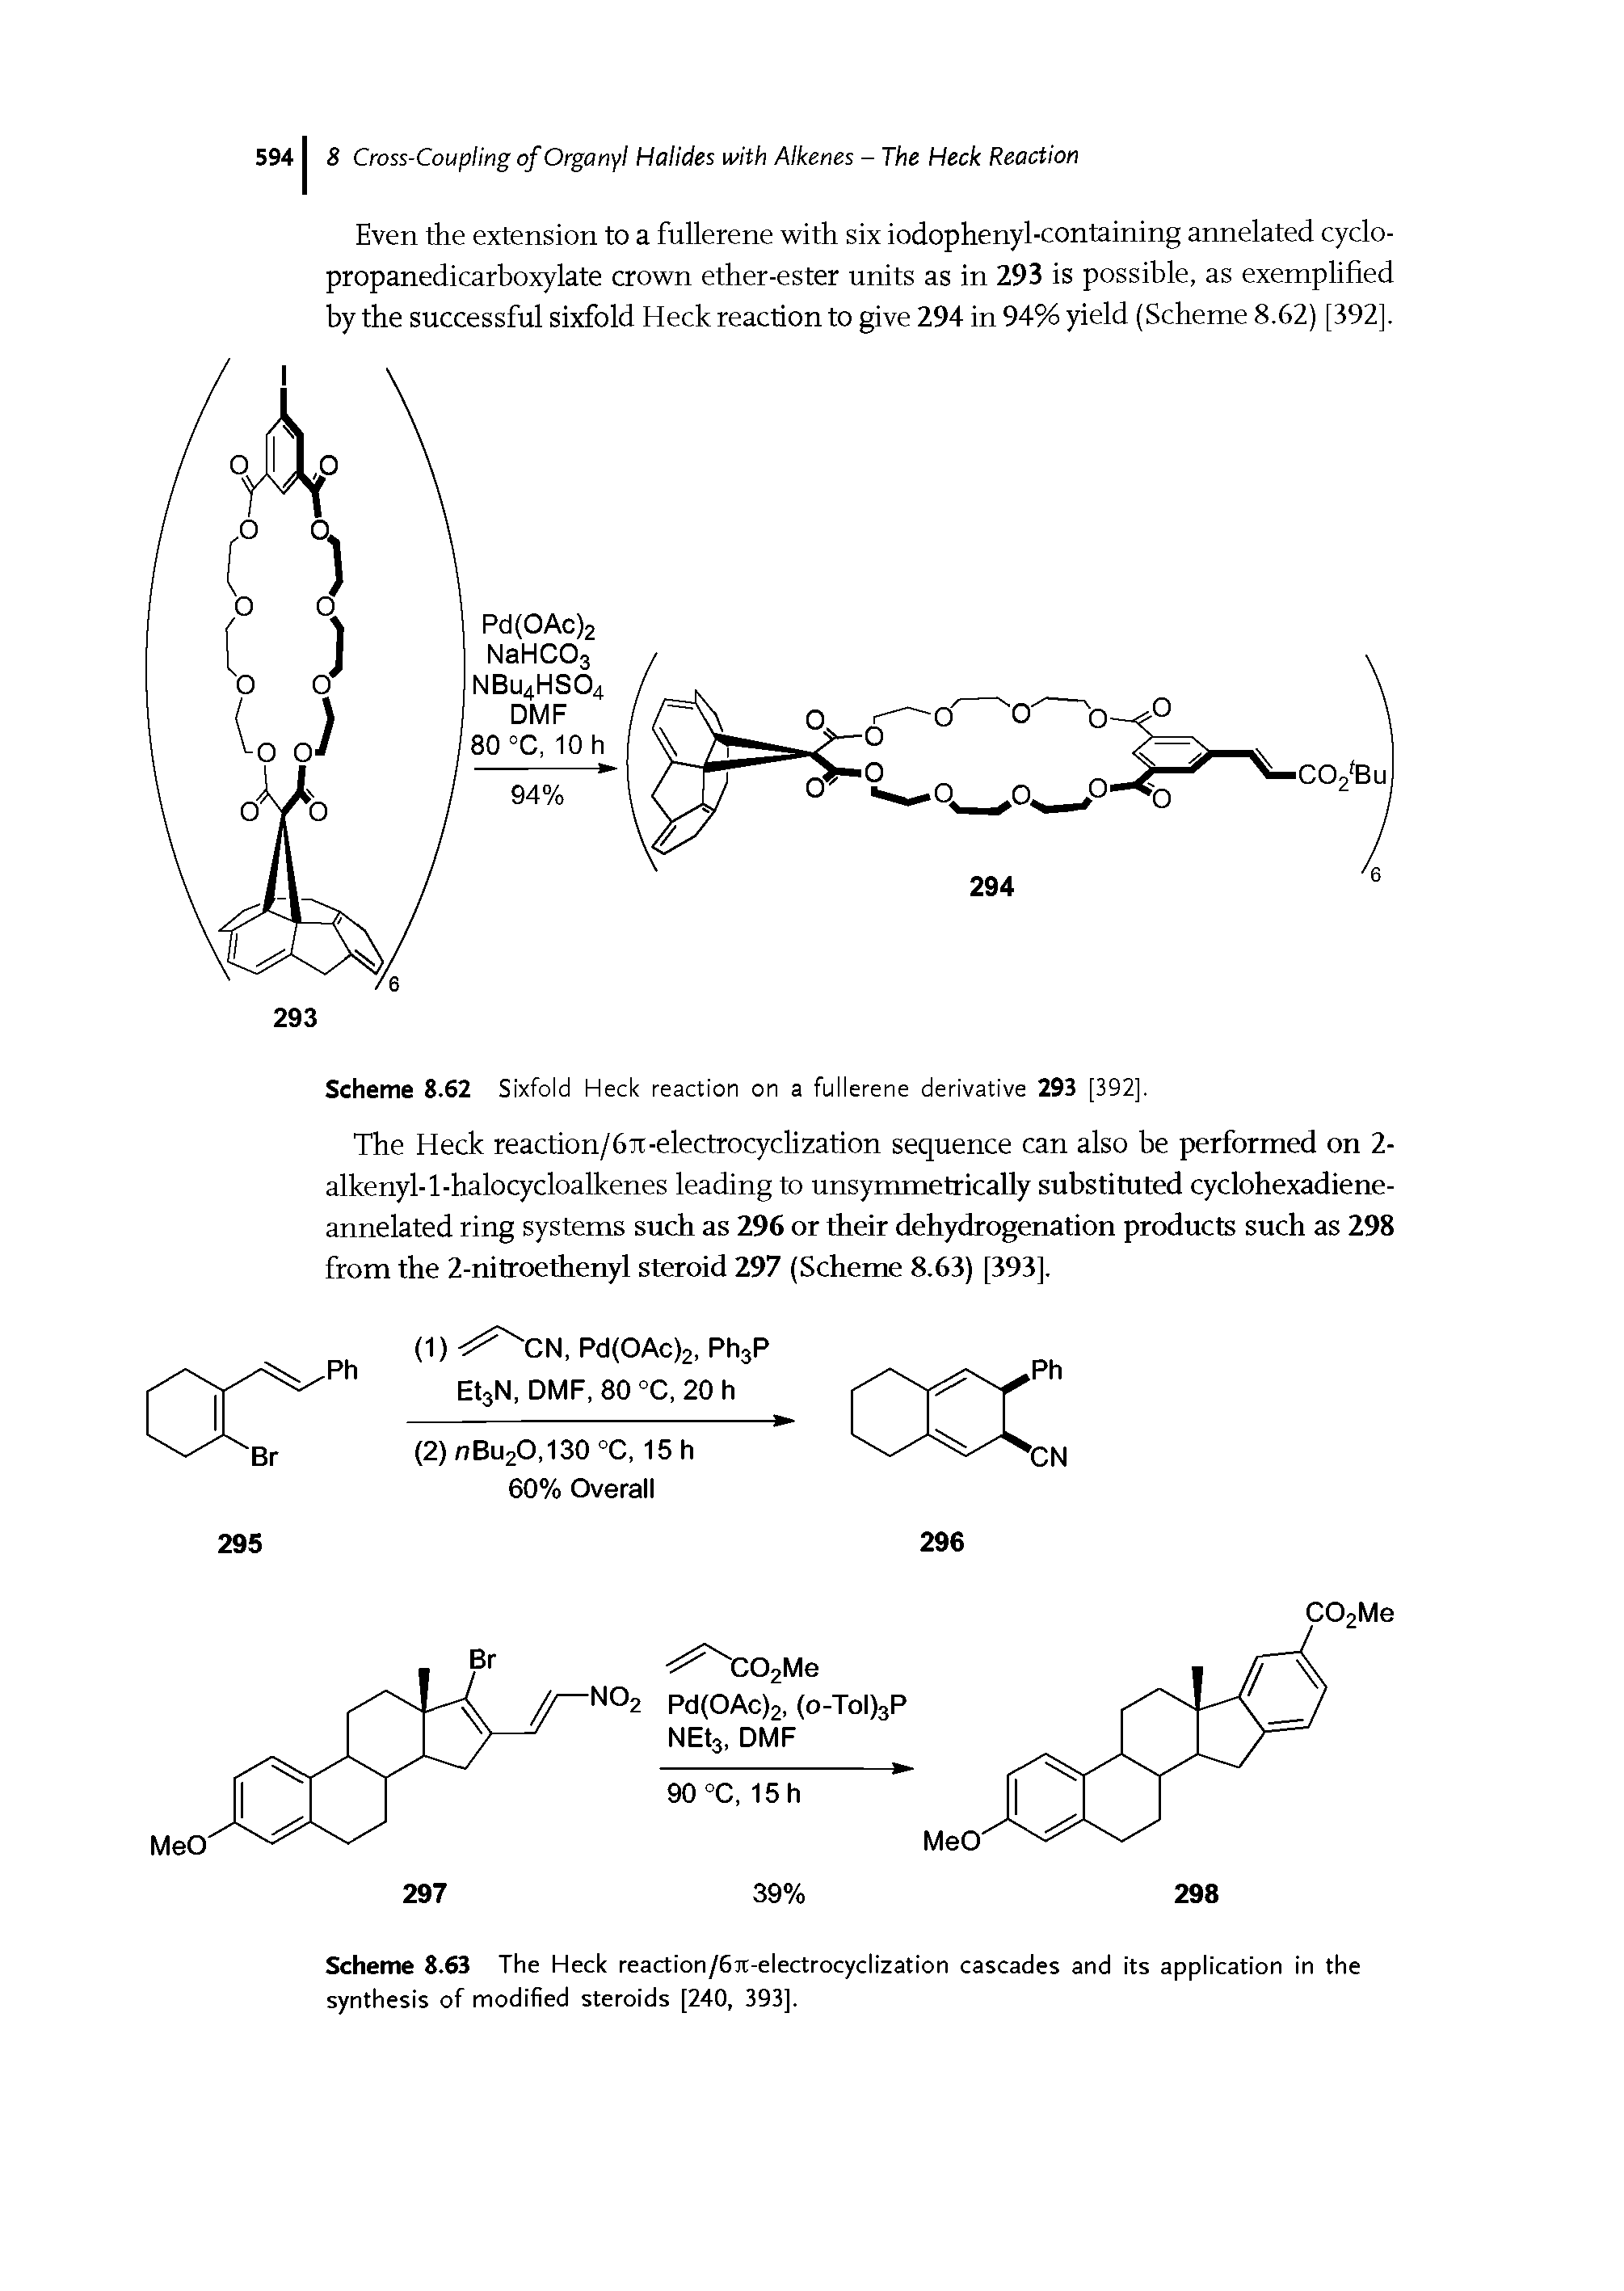 Scheme 8.63 The Heck reaction/6n-electrocyclization cascades and its application in the synthesis of modified steroids [240, 393].